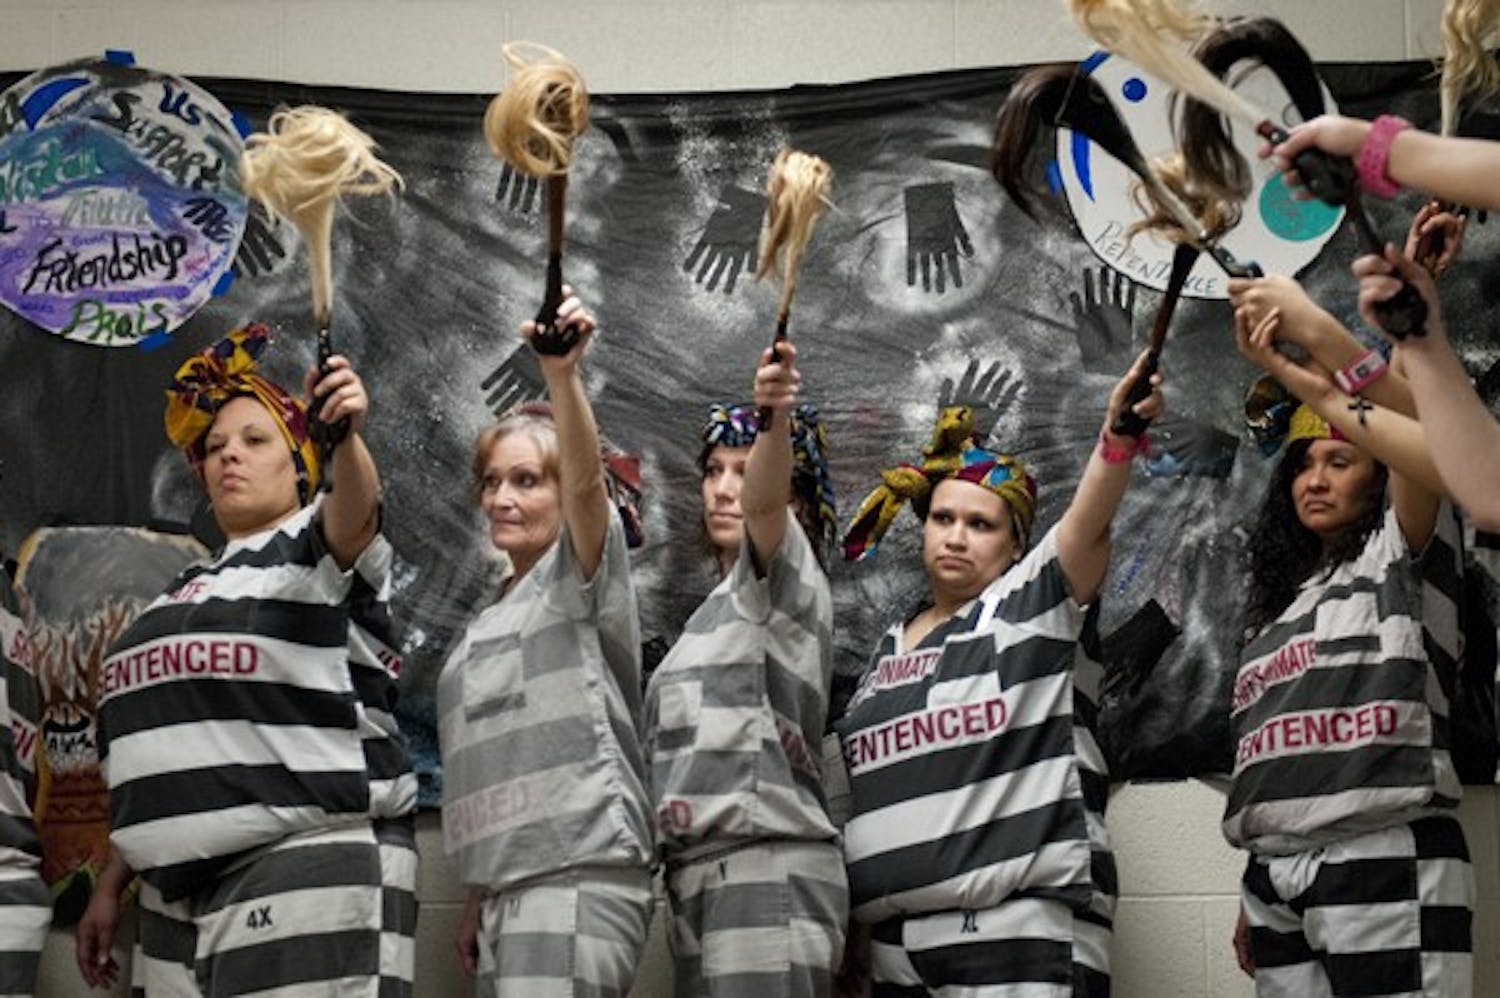 Slideshow: Artistic pursuits give inmates new perspective